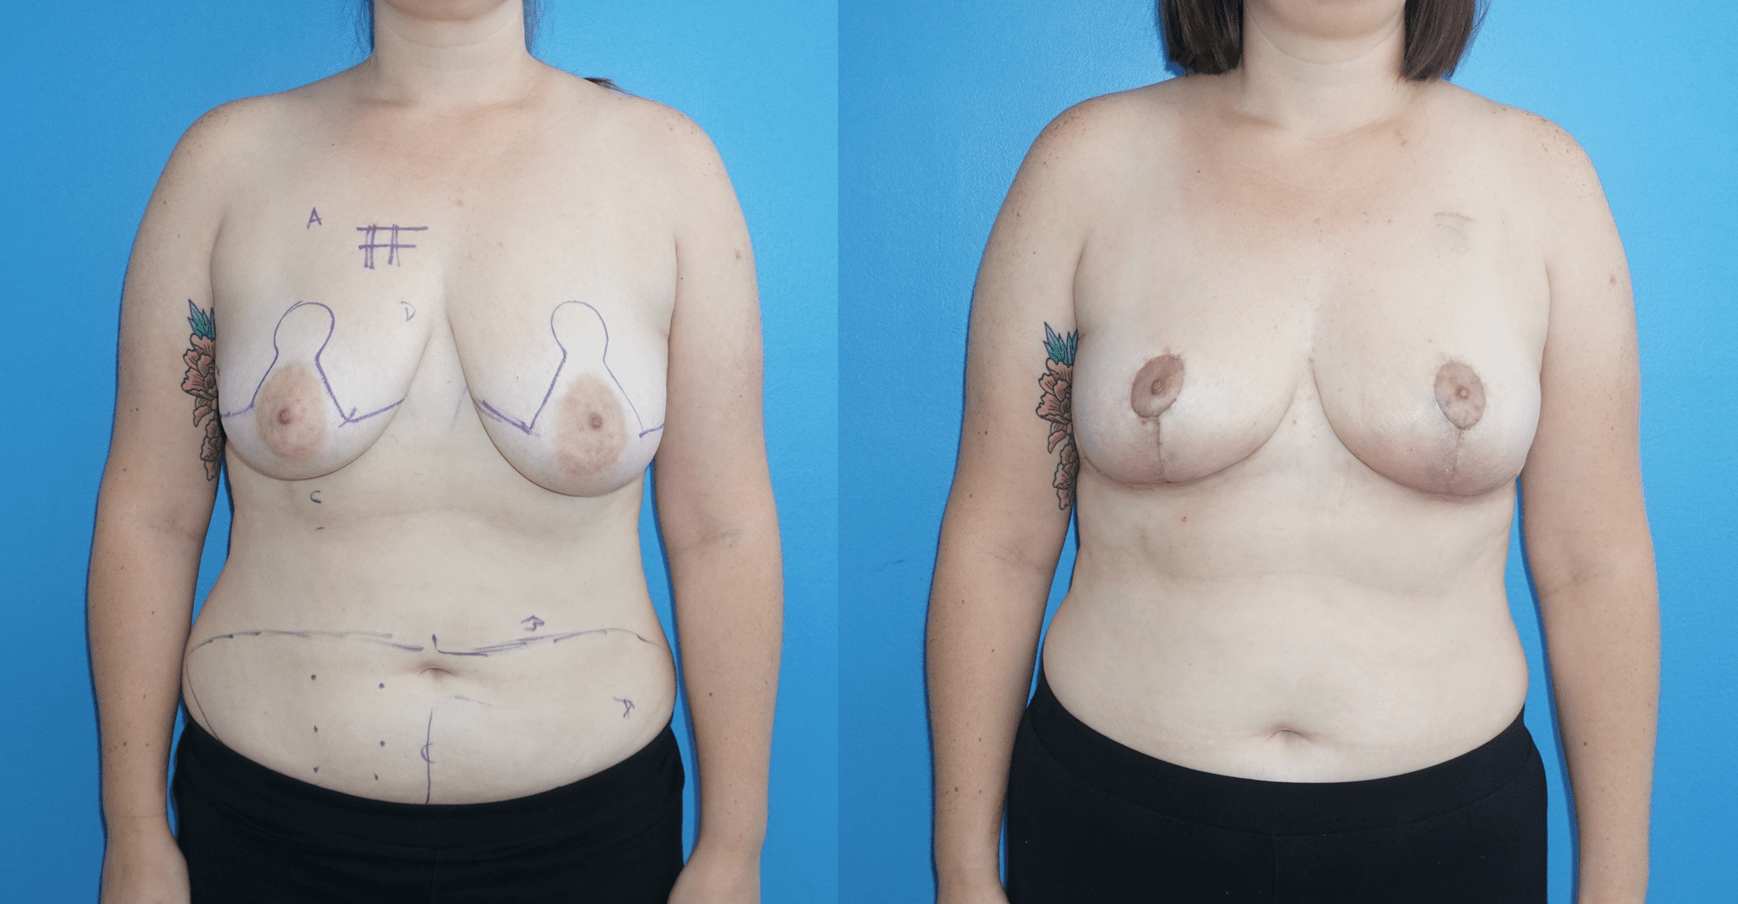 Oncoplastic Reconstruction of Following Lumpectomy and DIEP Flap Following Mastectomy